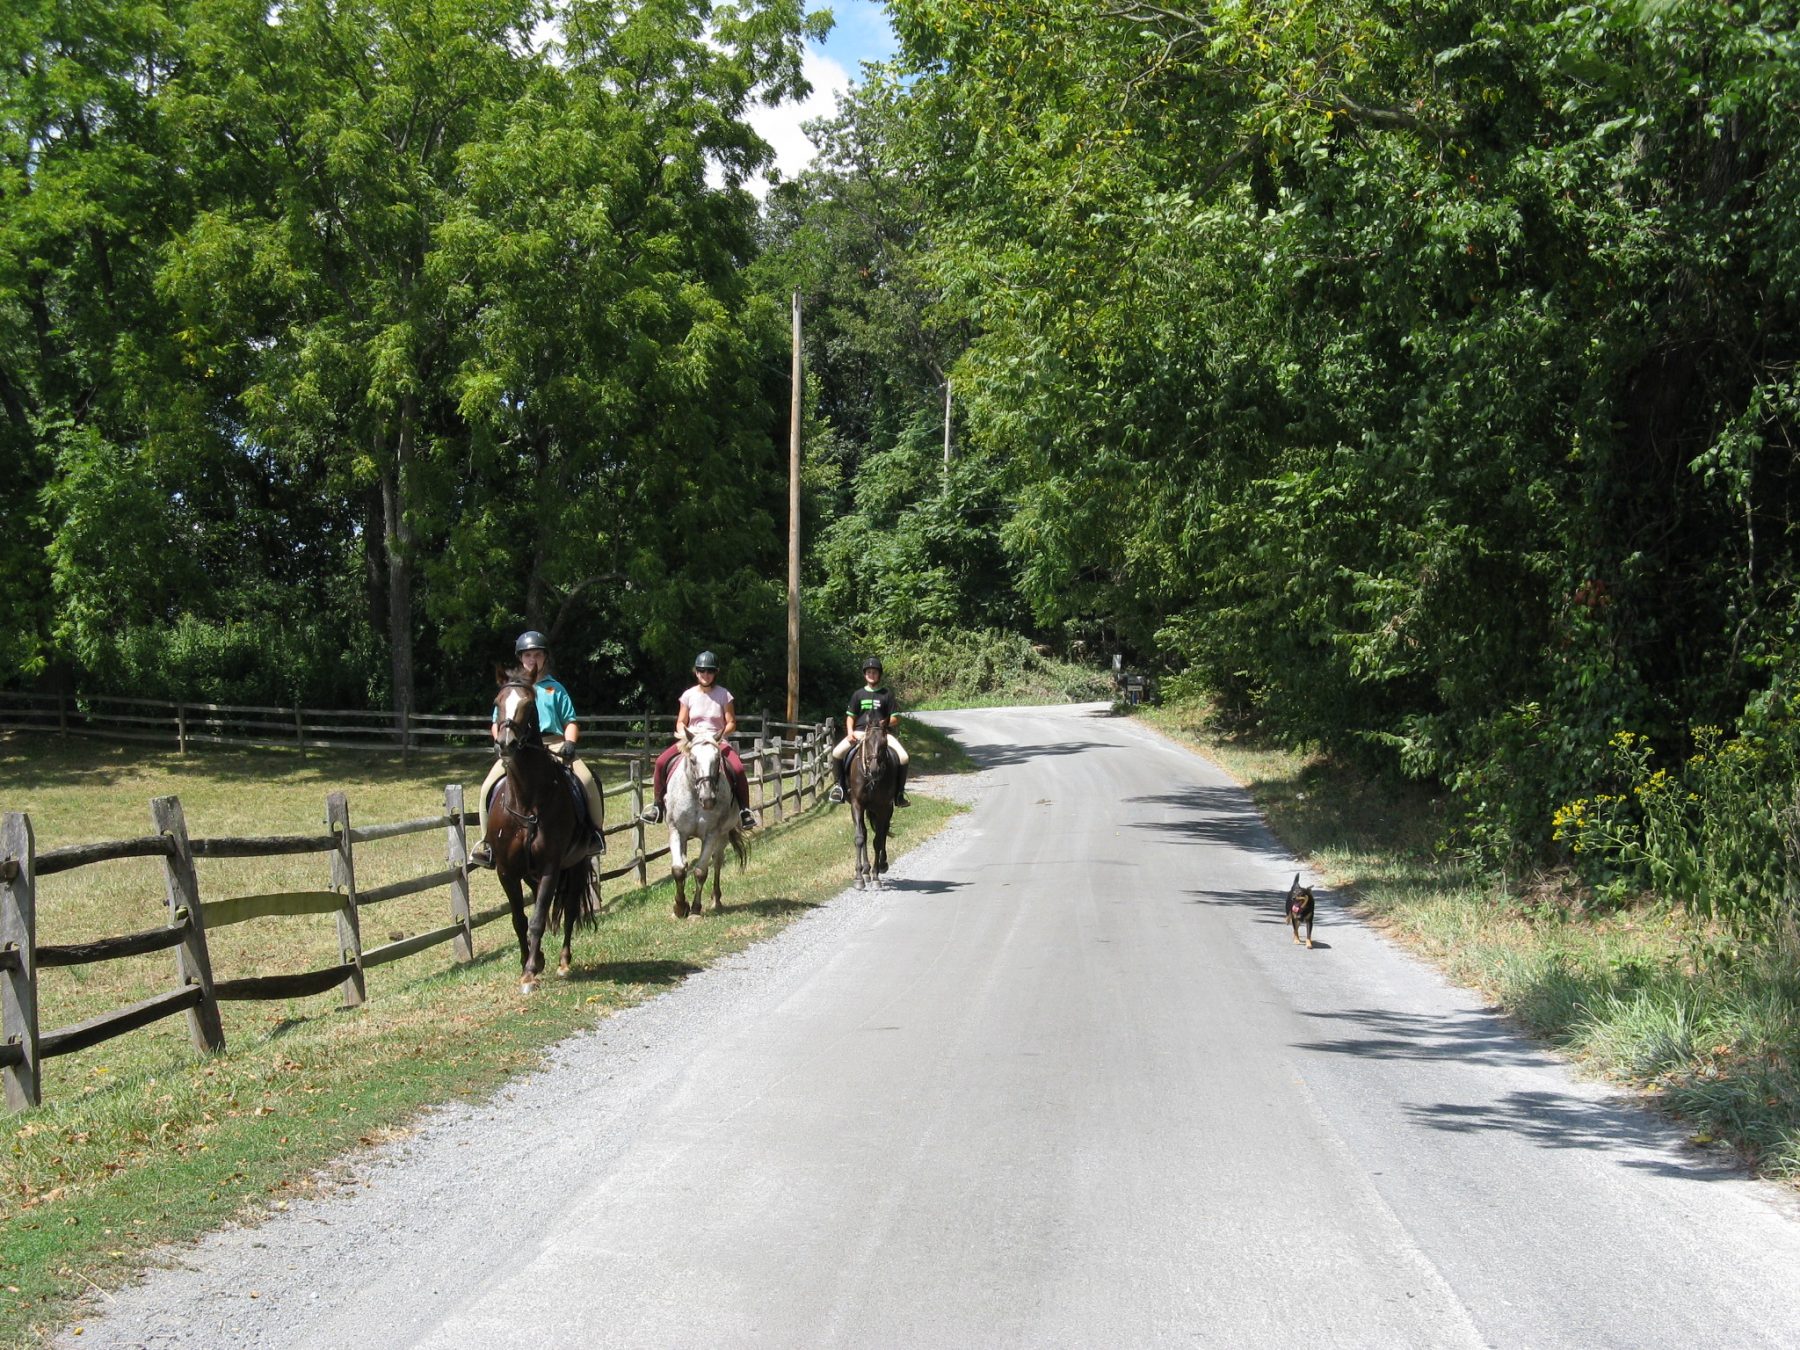 People riding on horses down rural road